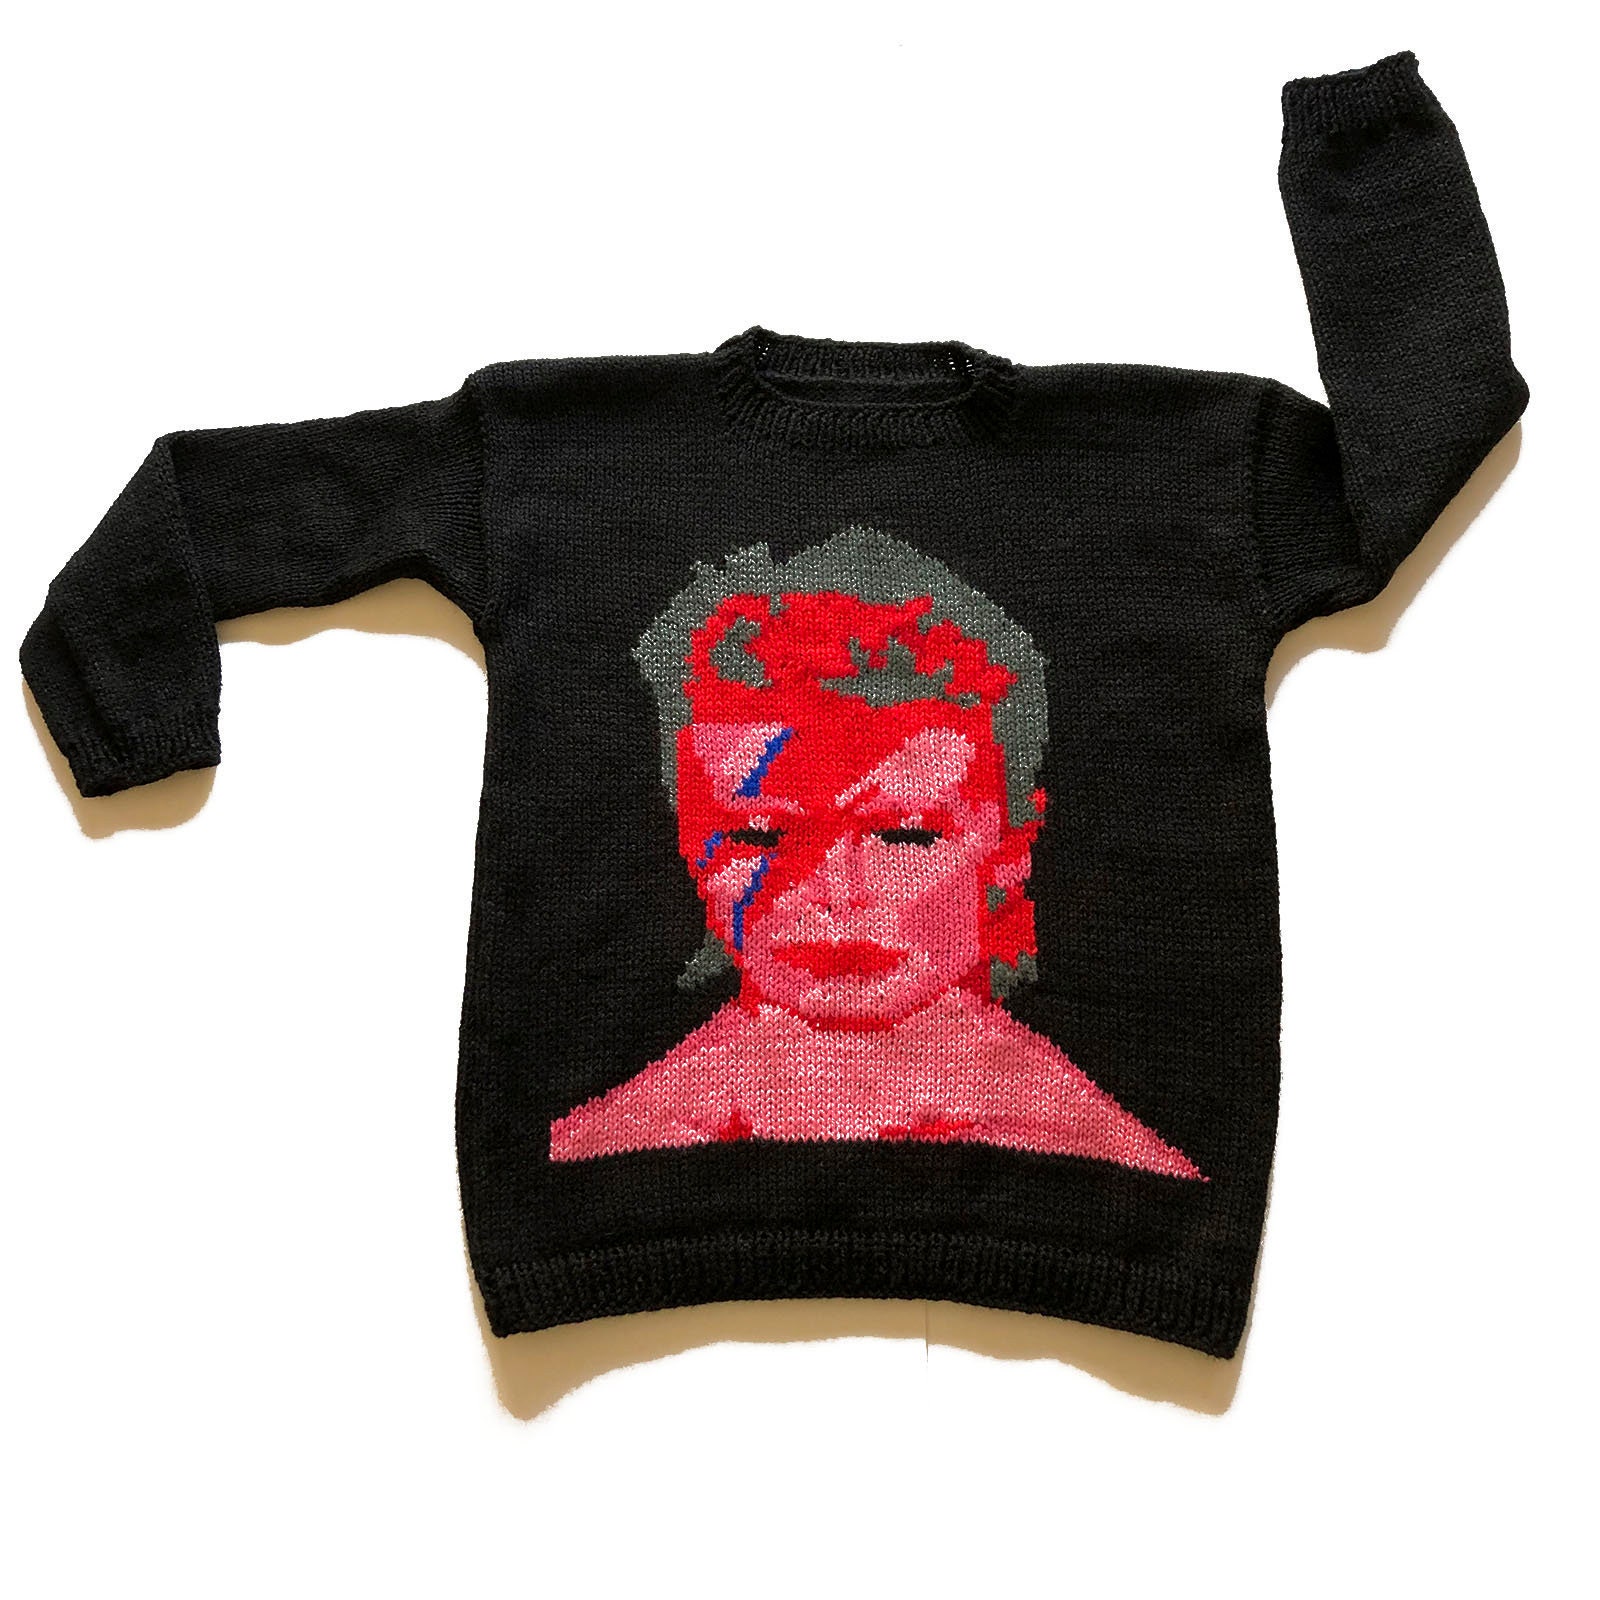 Made to order unisex and oversized sweater handmade with chilean wool Intarsia jumper with an exclusive design for the music fans